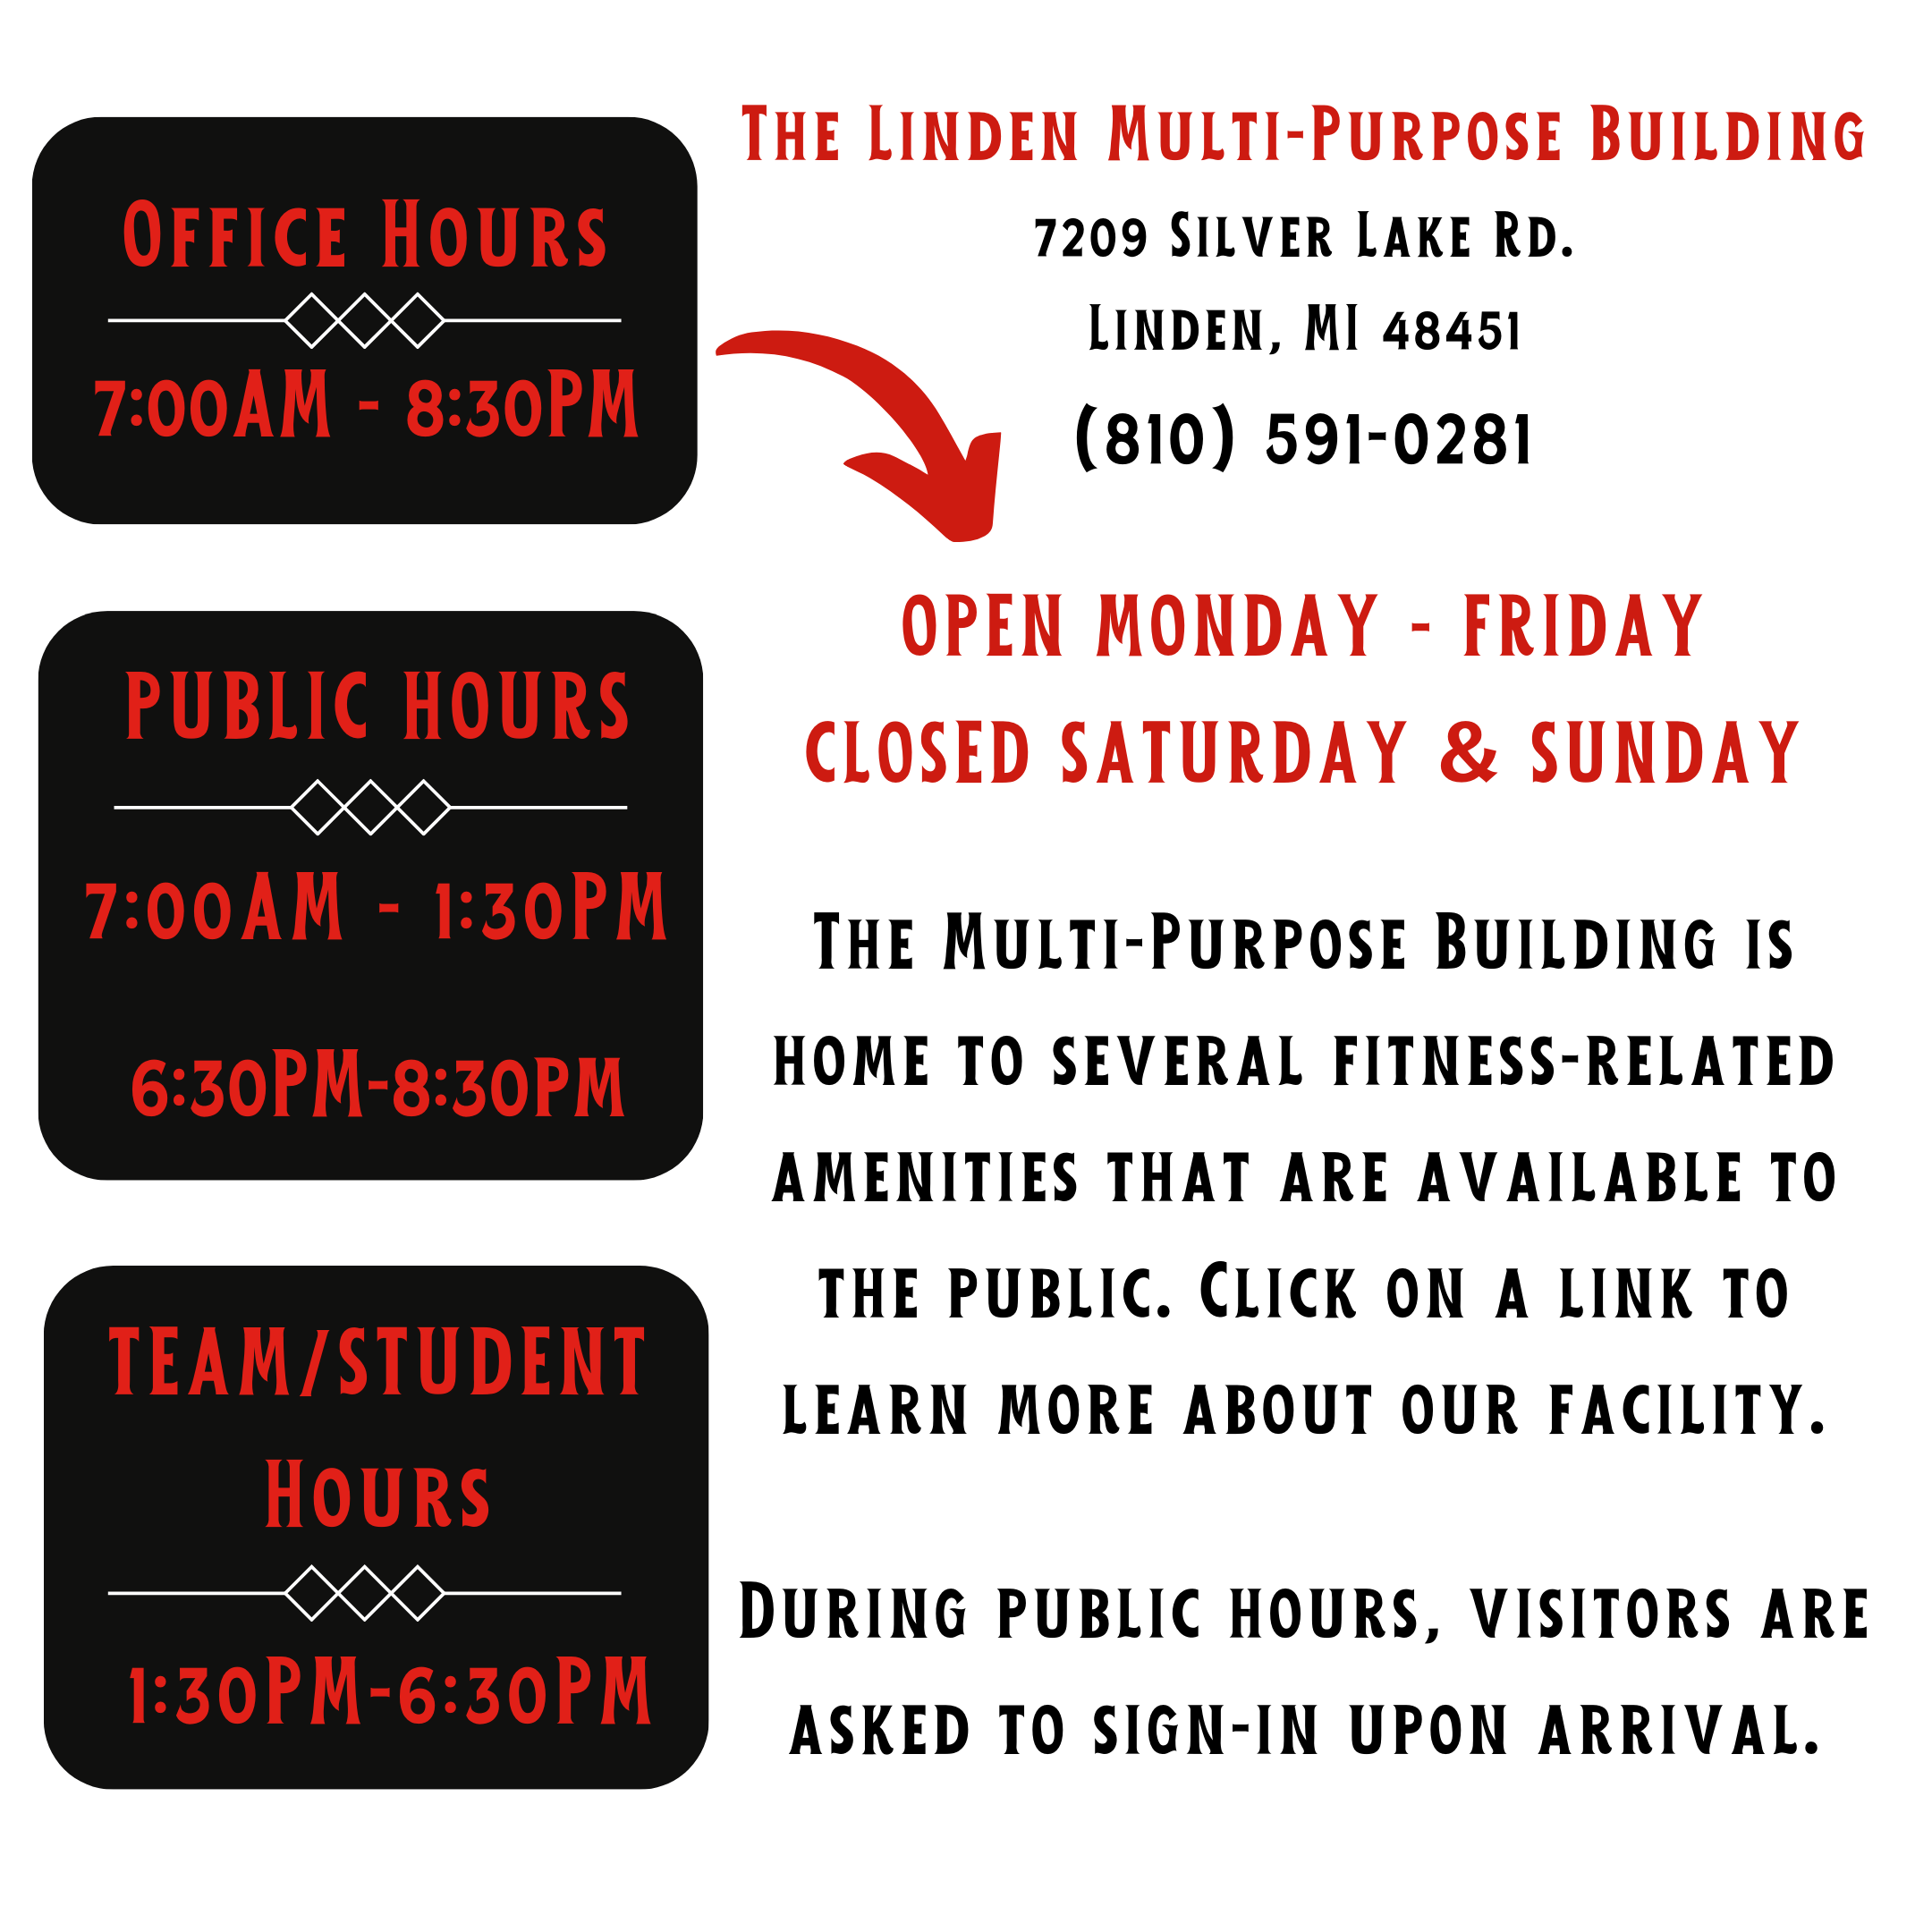 text Multi-Purpose Building; text says hours of operation and address, phone for the MPB